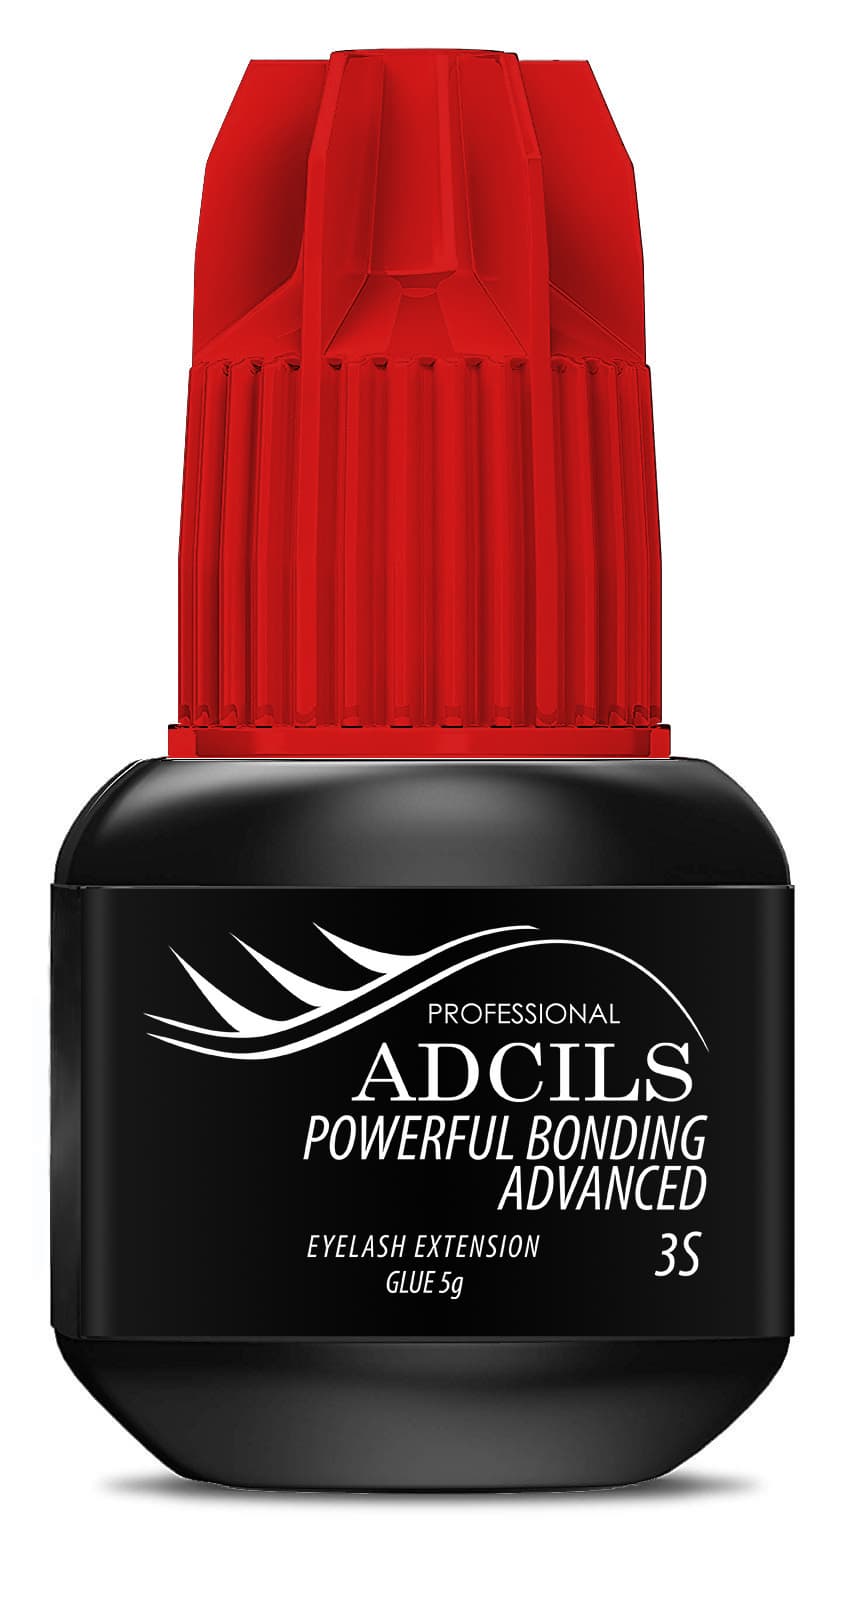 ADCILS PROFESSIONAL EXTENSION GLUE LINES BY SILSTAR